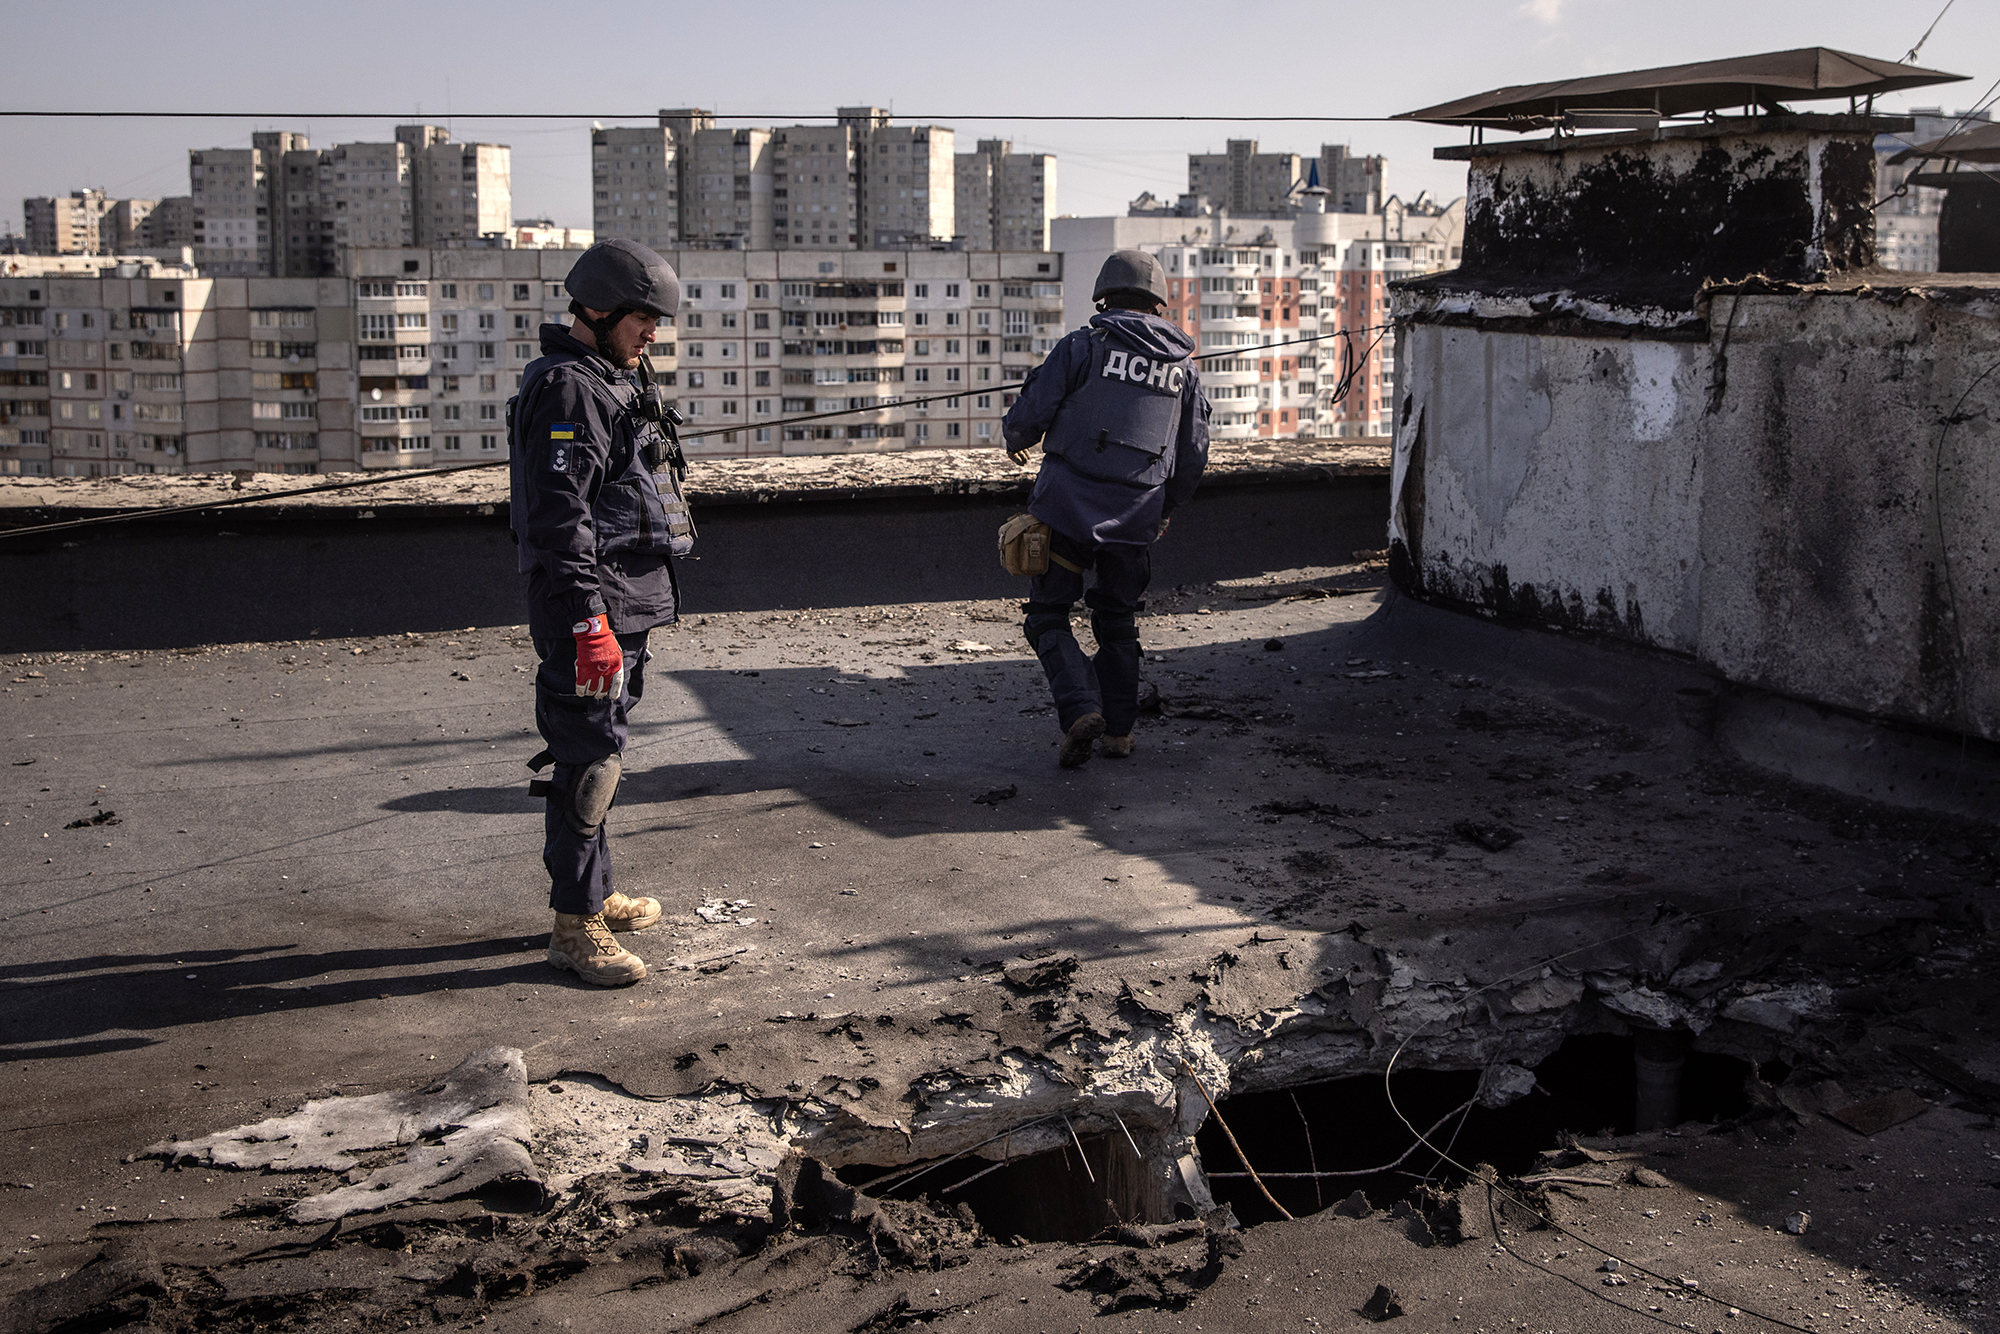 Members of the Kharkiv emergency response services unit search a rooftop for rocket debris from recent Russian attacks on April 15, in Kharkiv, Ukraine. 